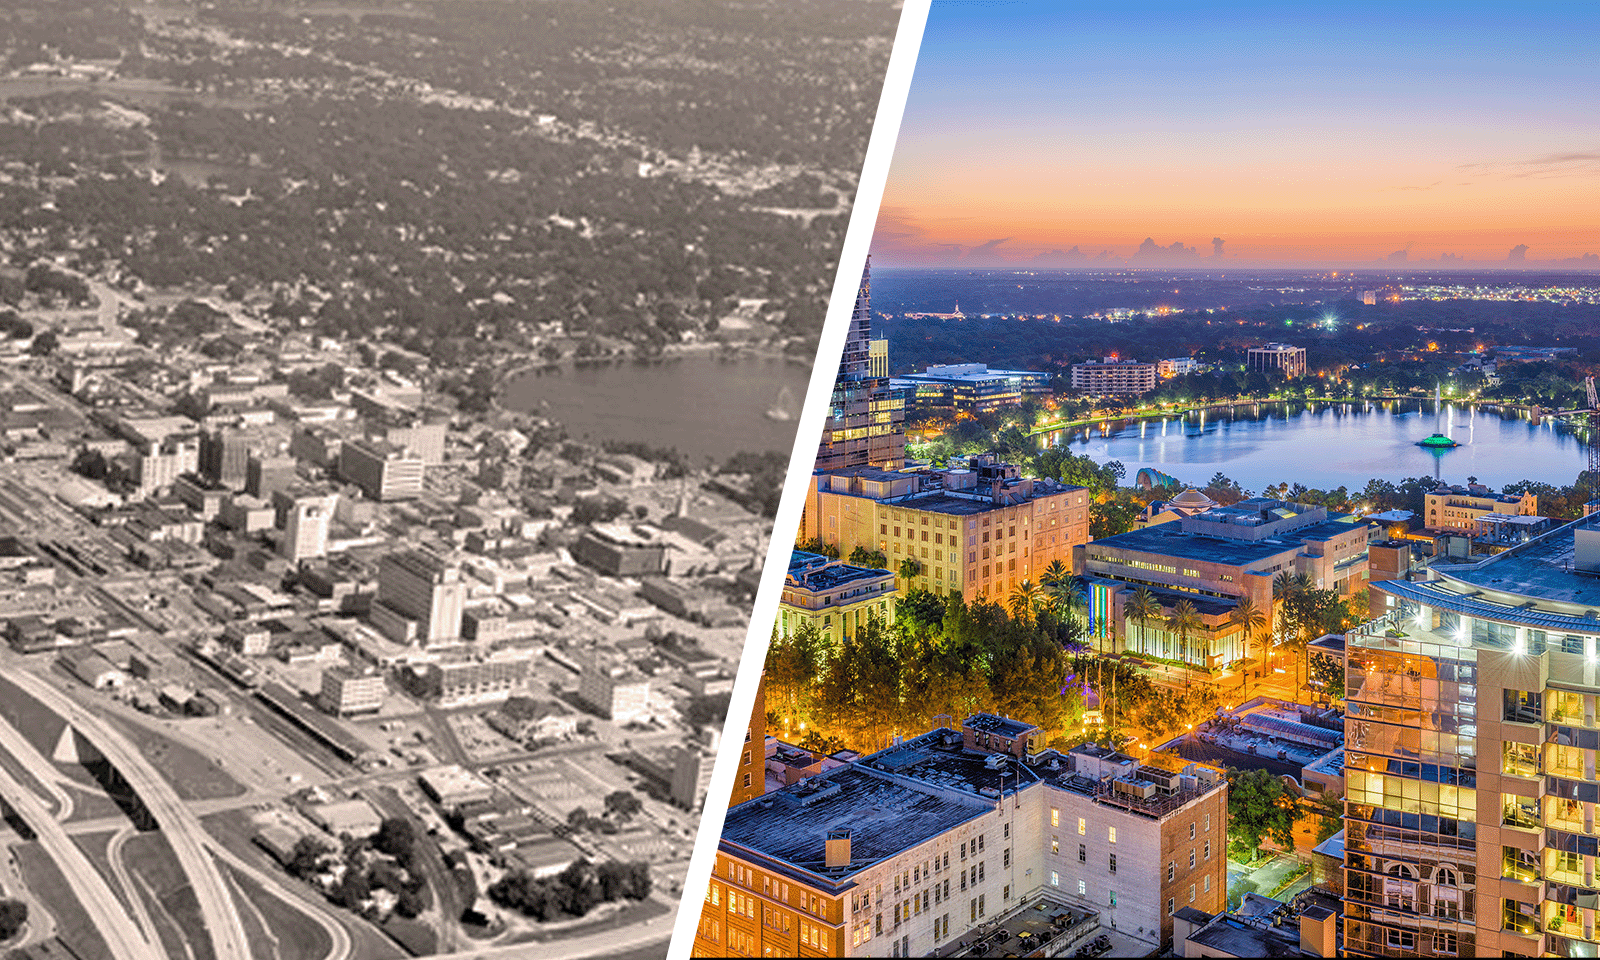 two images of downtown orlando in the 1960s and today